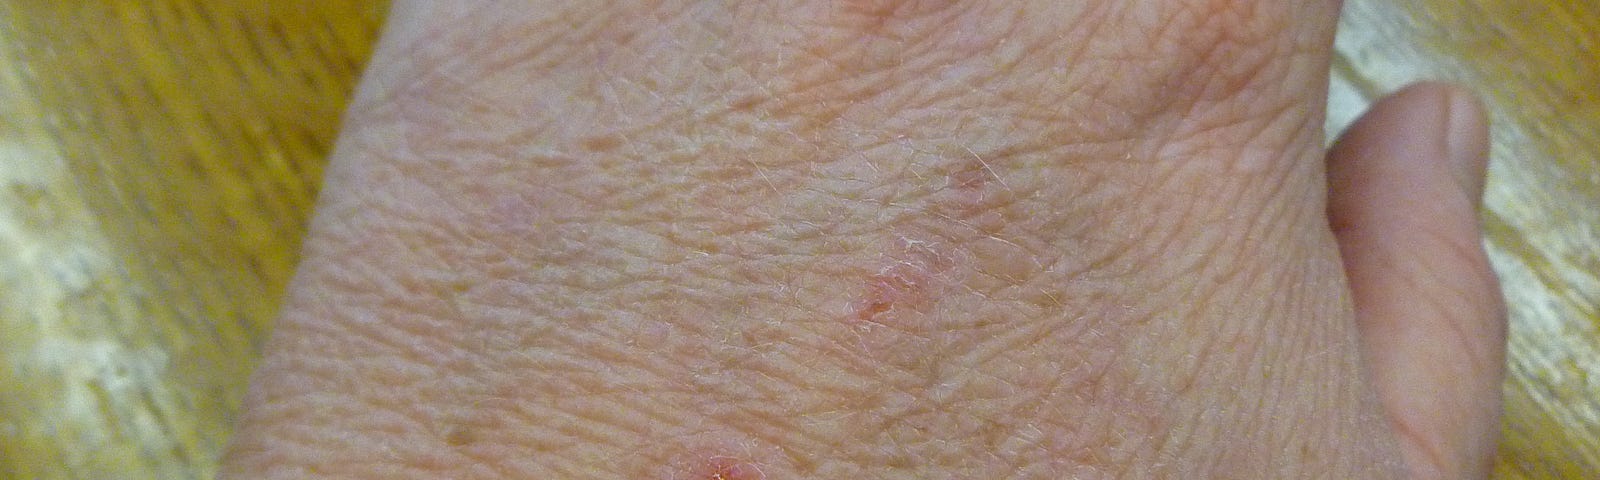 A close-up of a person’s hand shows the skin details clearly, and there are several red marks or blemishes visible on the back of the hand. The skin texture is wrinkled, and the photograph captures various skin tones and lines, suggesting a mature age for the individual.